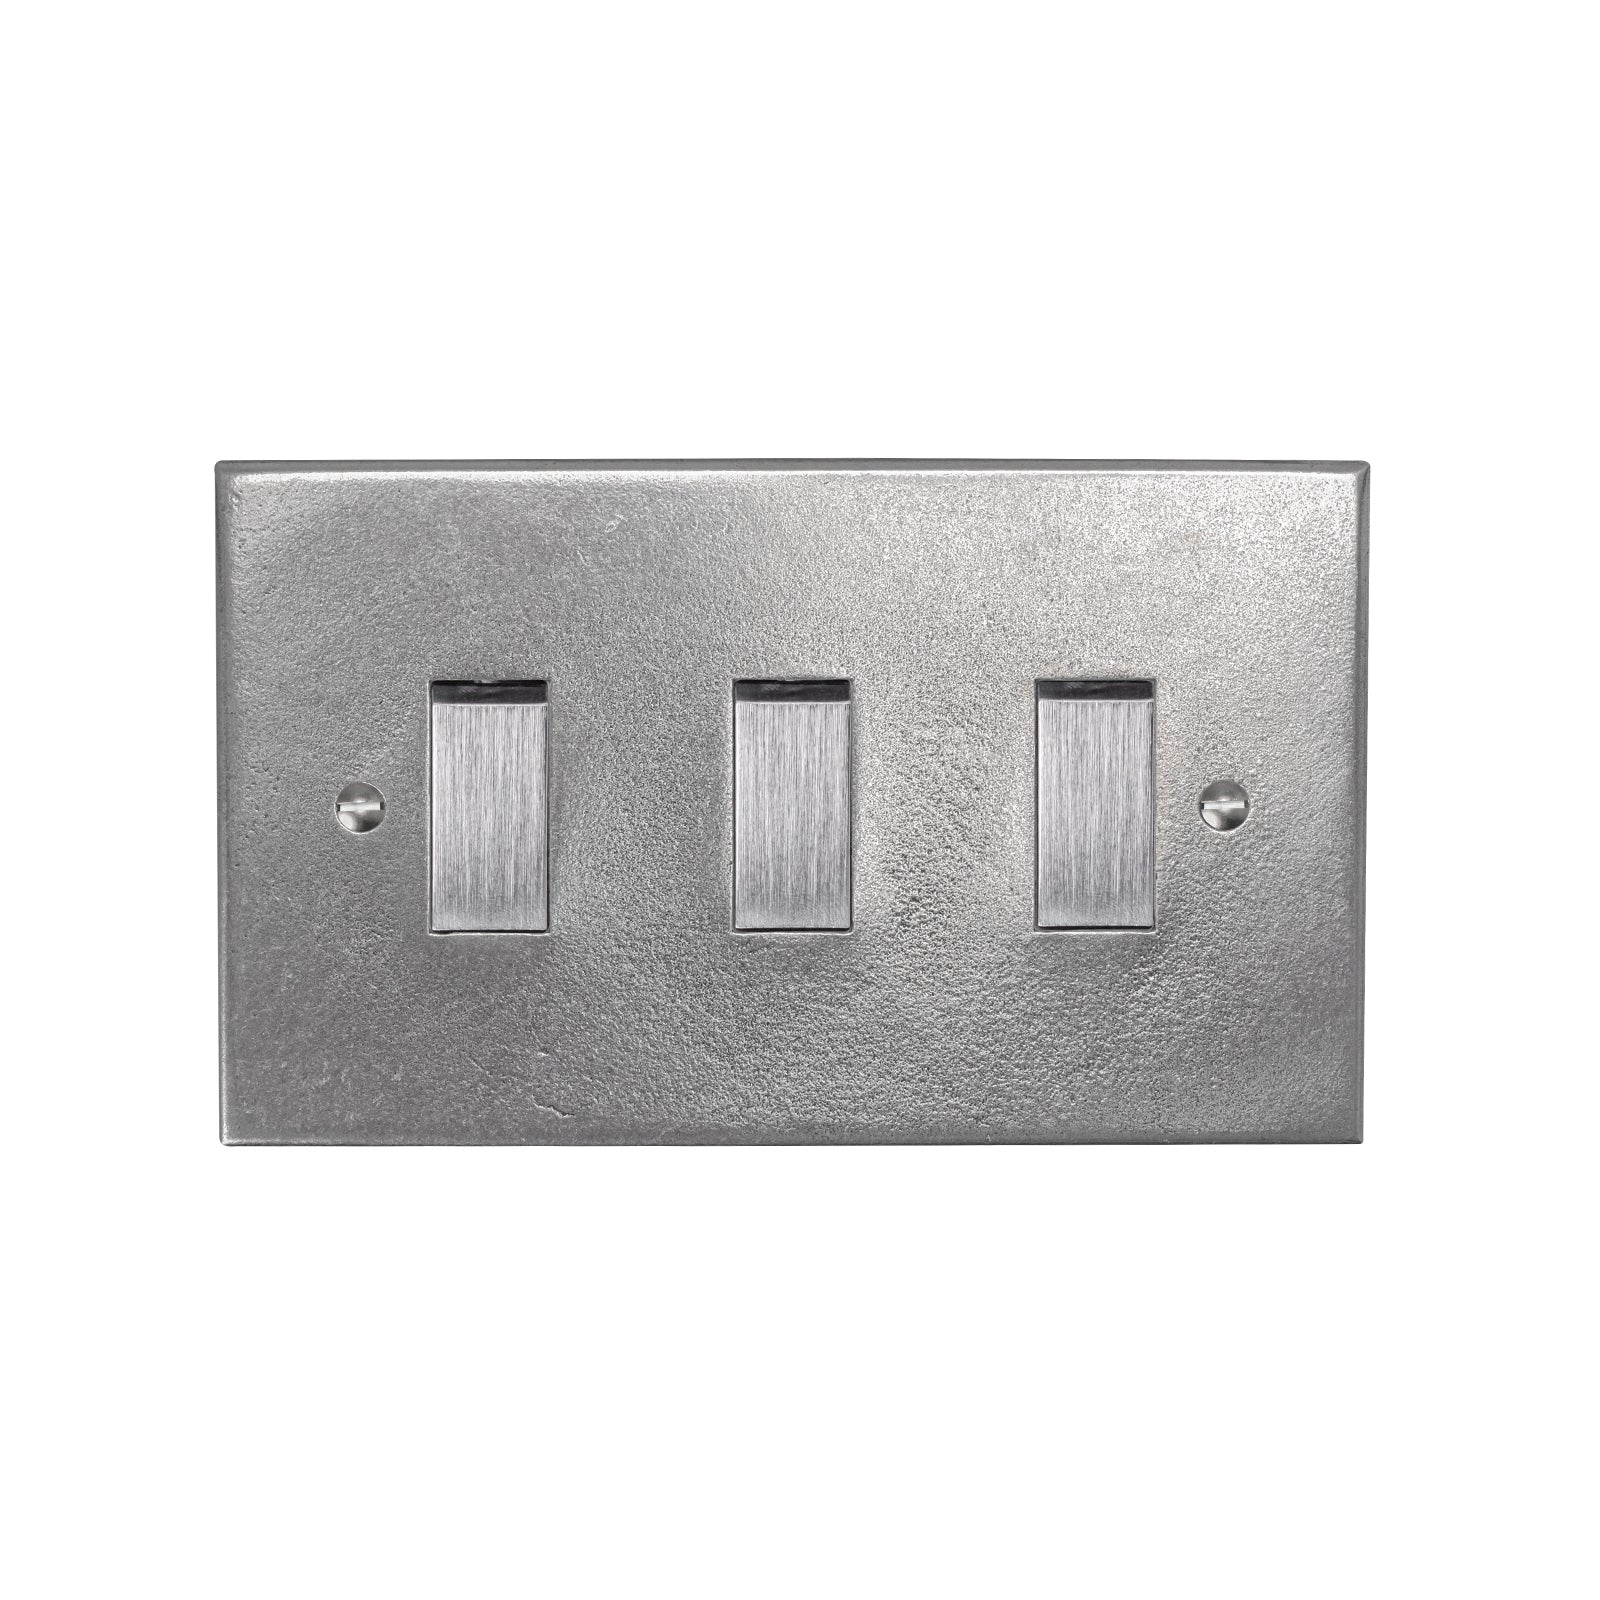 Pewter 3 Gang Light Switch